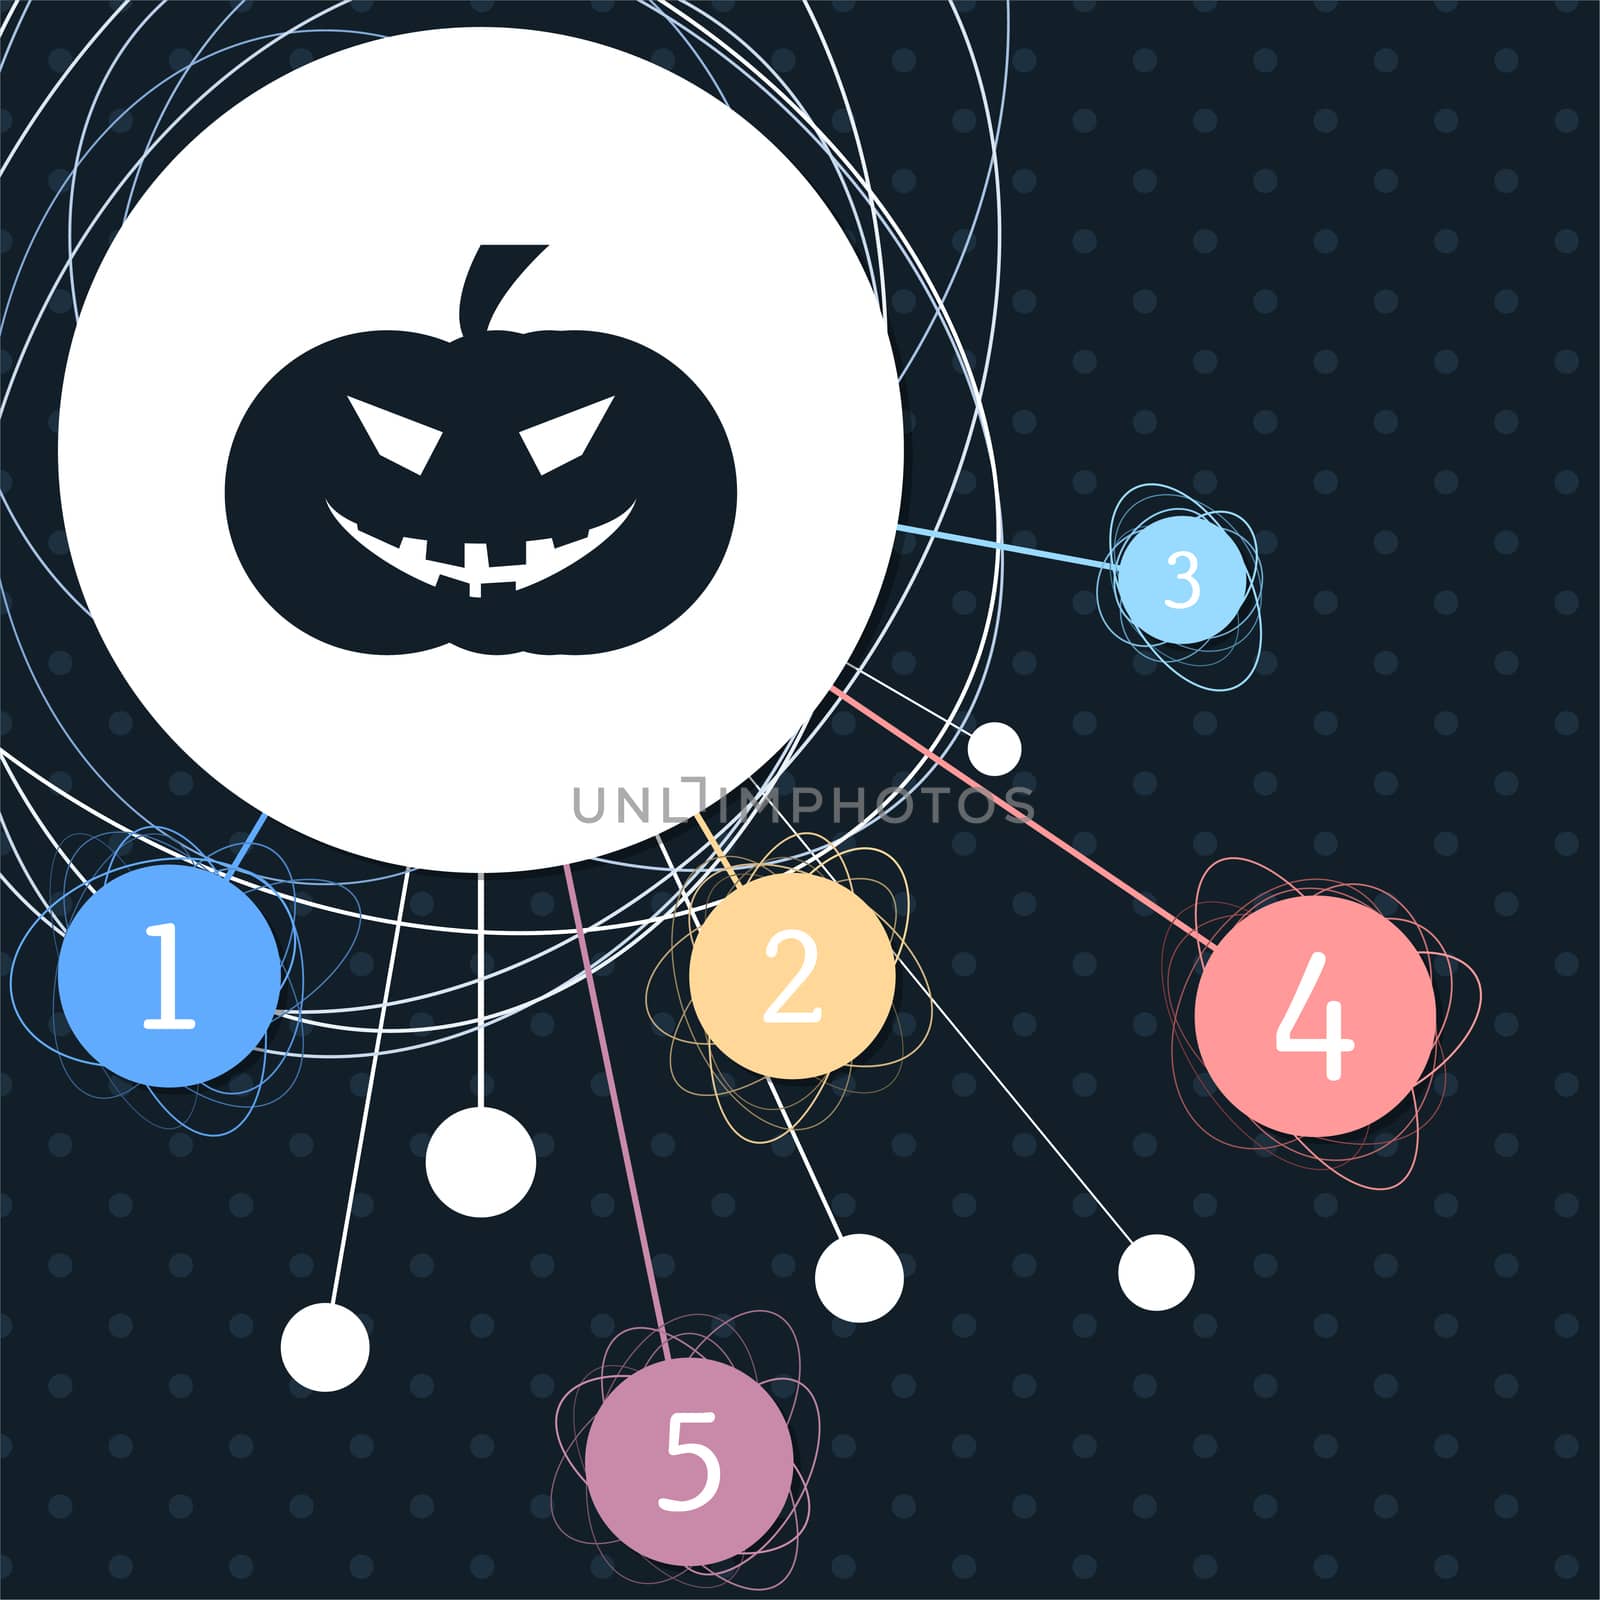 halloween pumpkin icon with the background to the point and with infographic style. illustration